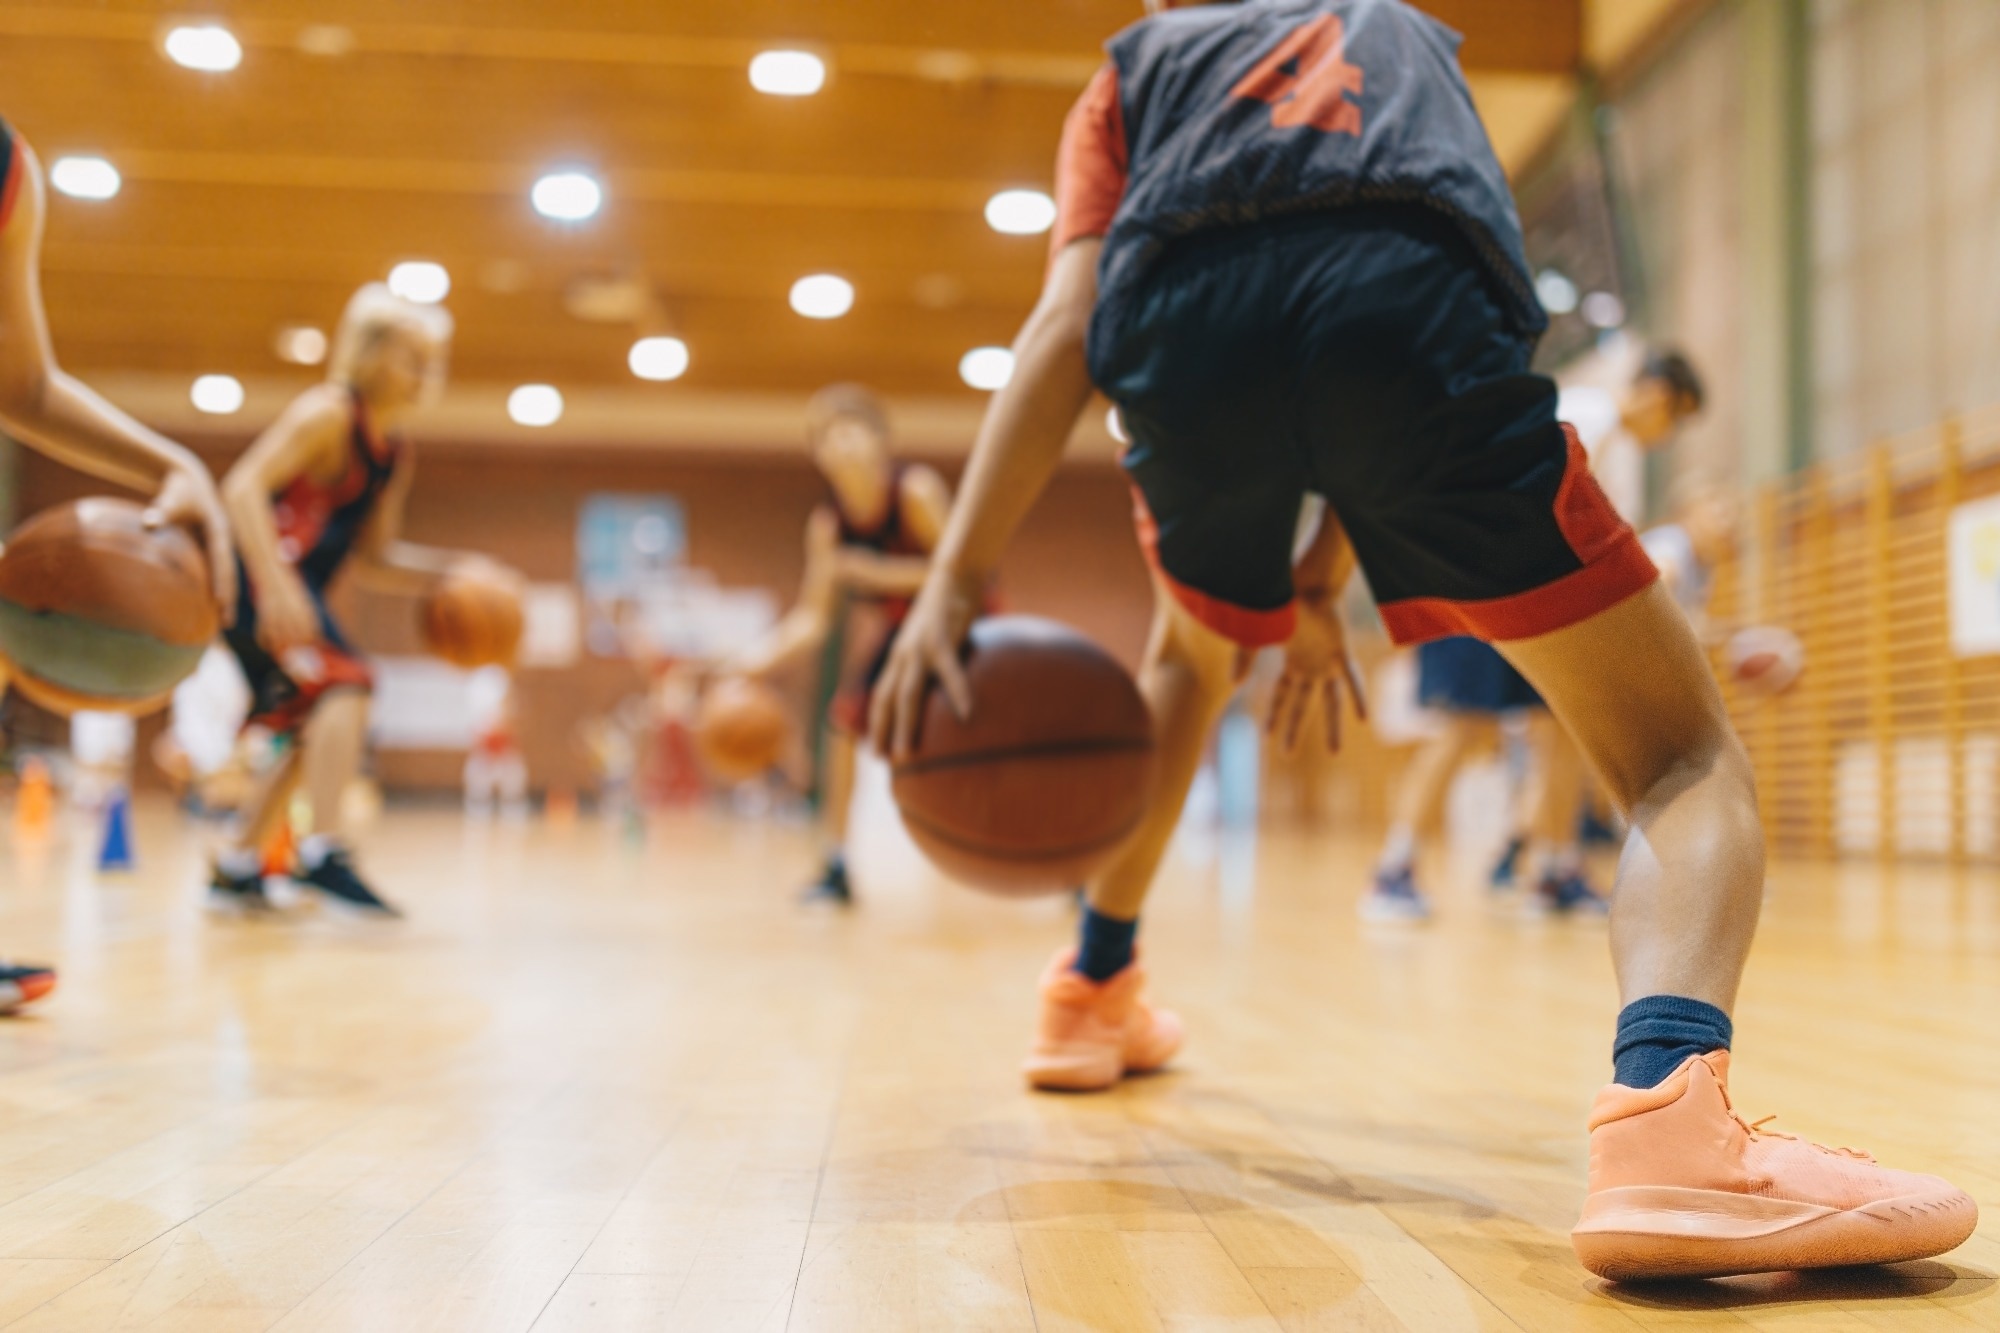 Study: Young basketball players have better manual dexterity performance than sportsmen and non-sportsmen of the same age: a cross-sectional study. Image Credit: matimix / Shutterstock